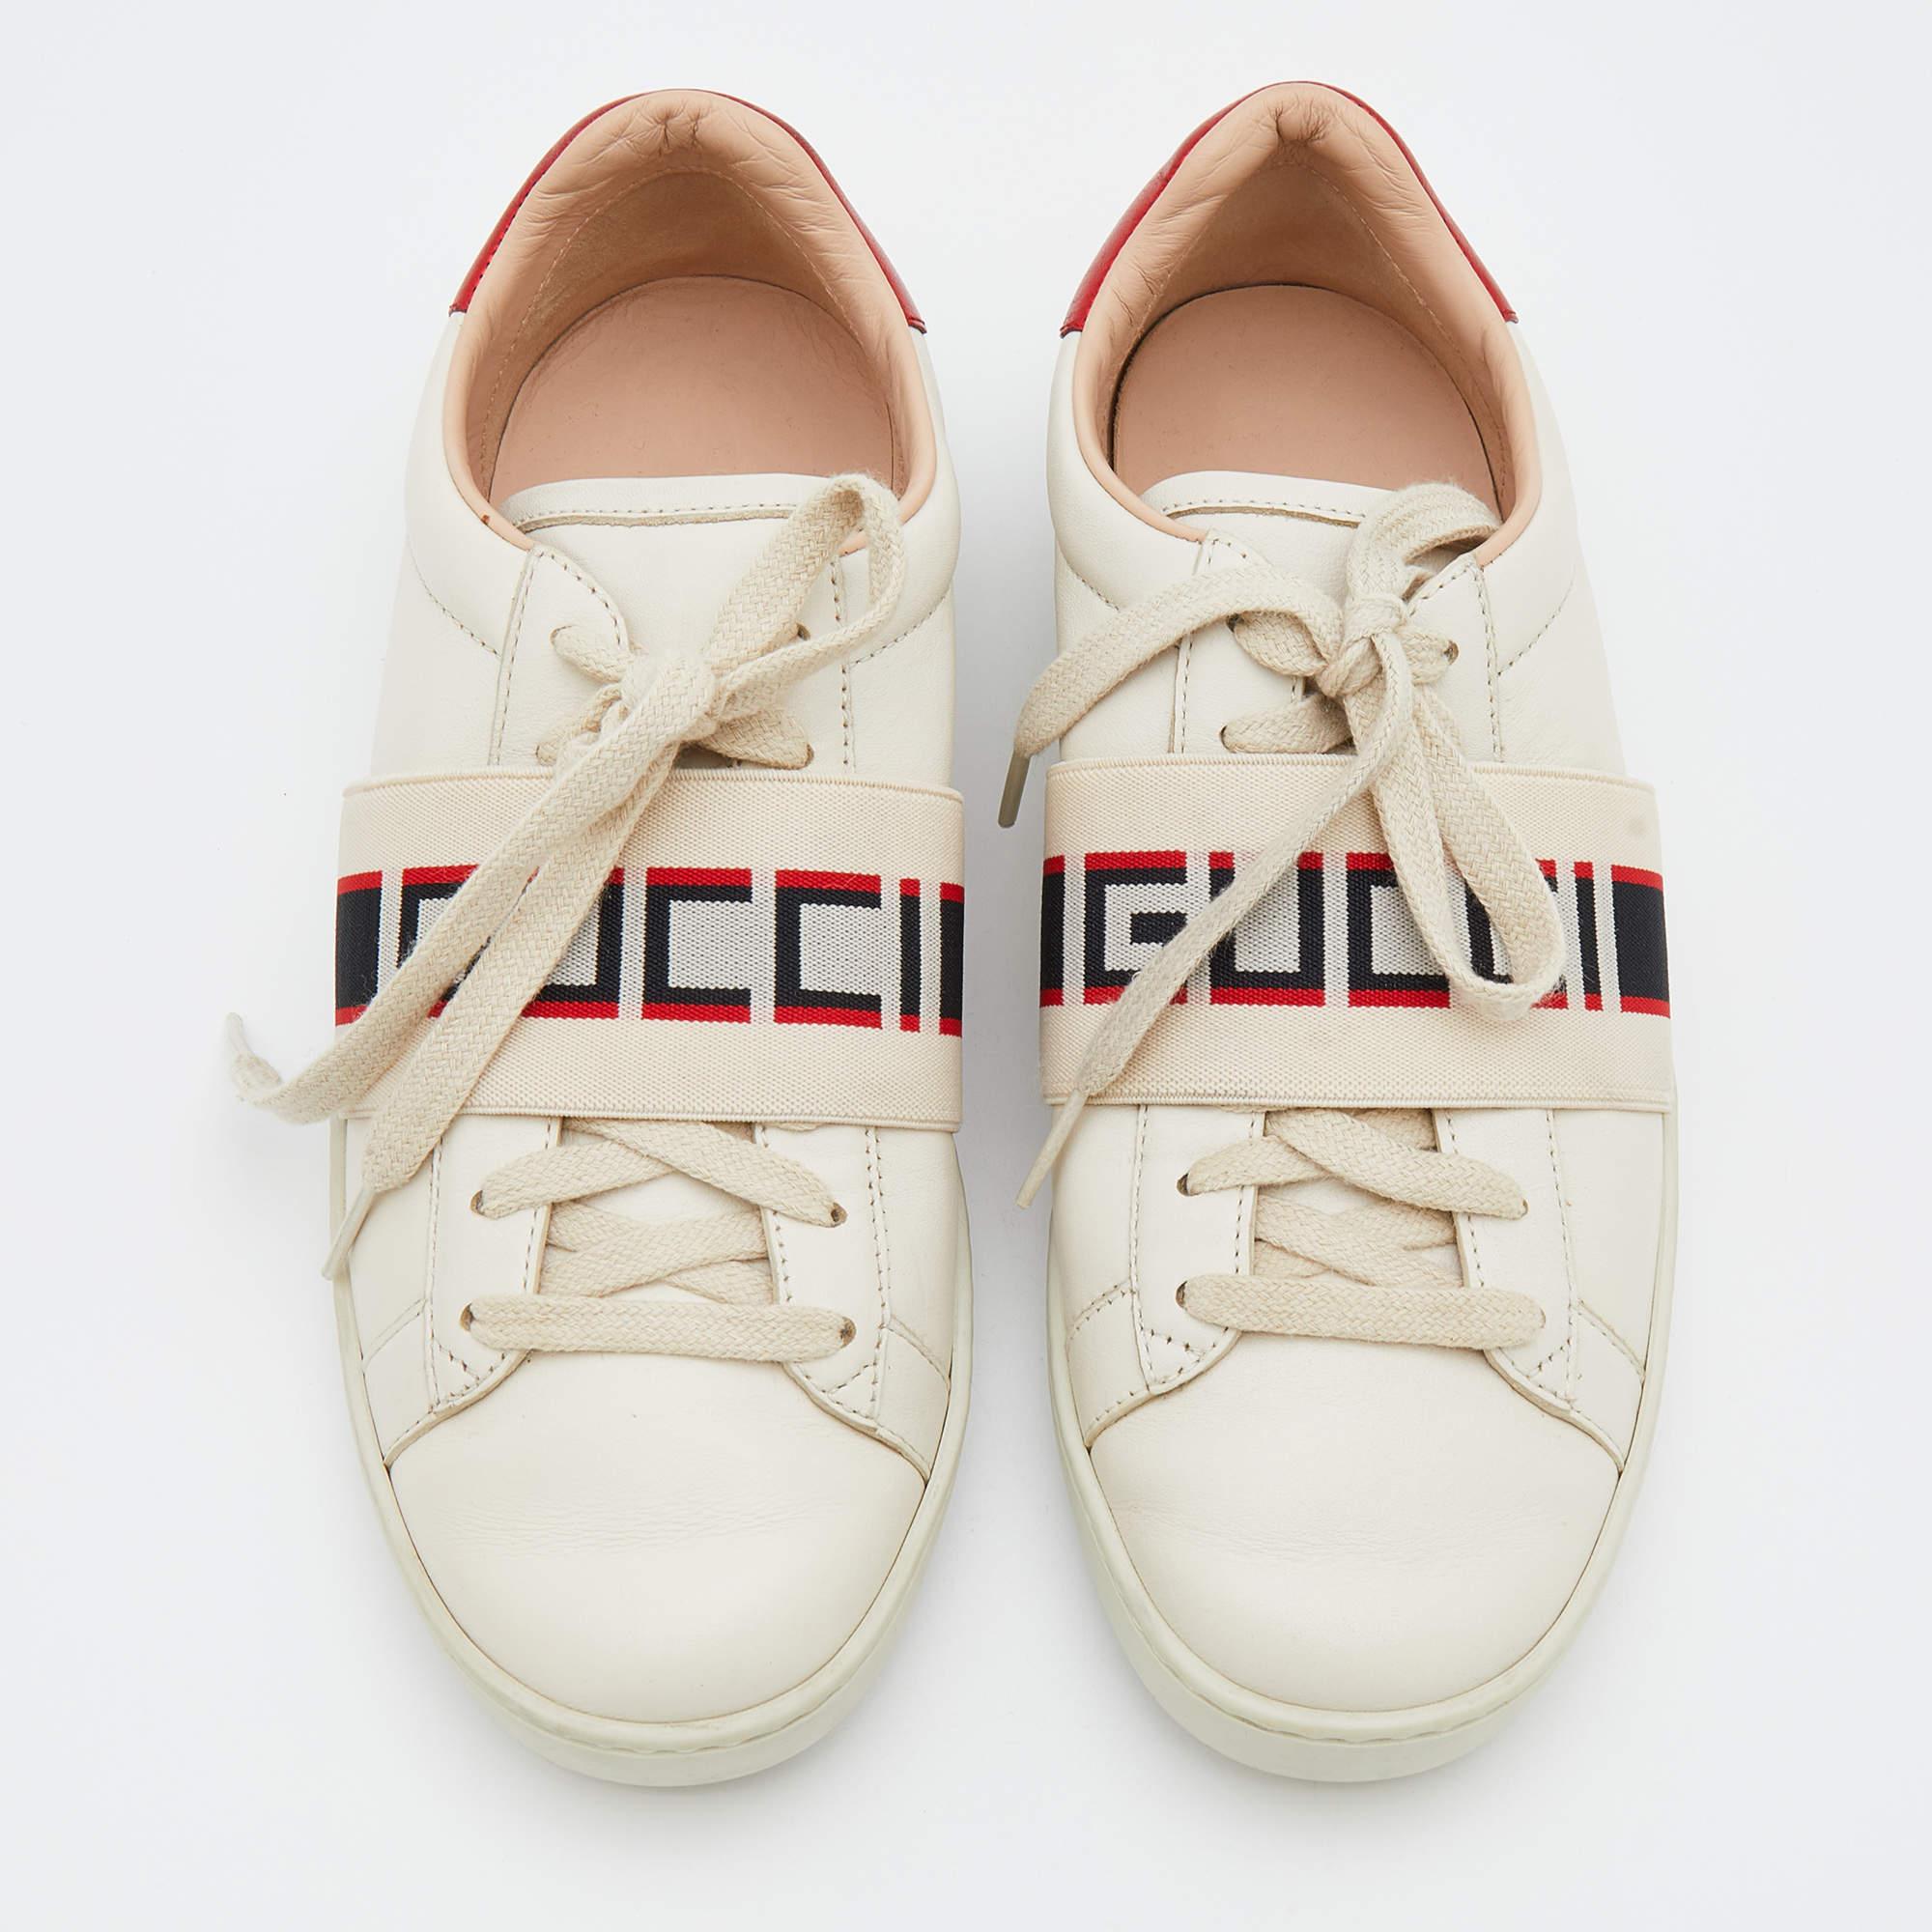 Gucci White/Red Leather Elastic Band Ace Low Top Sneakers Size 37 2